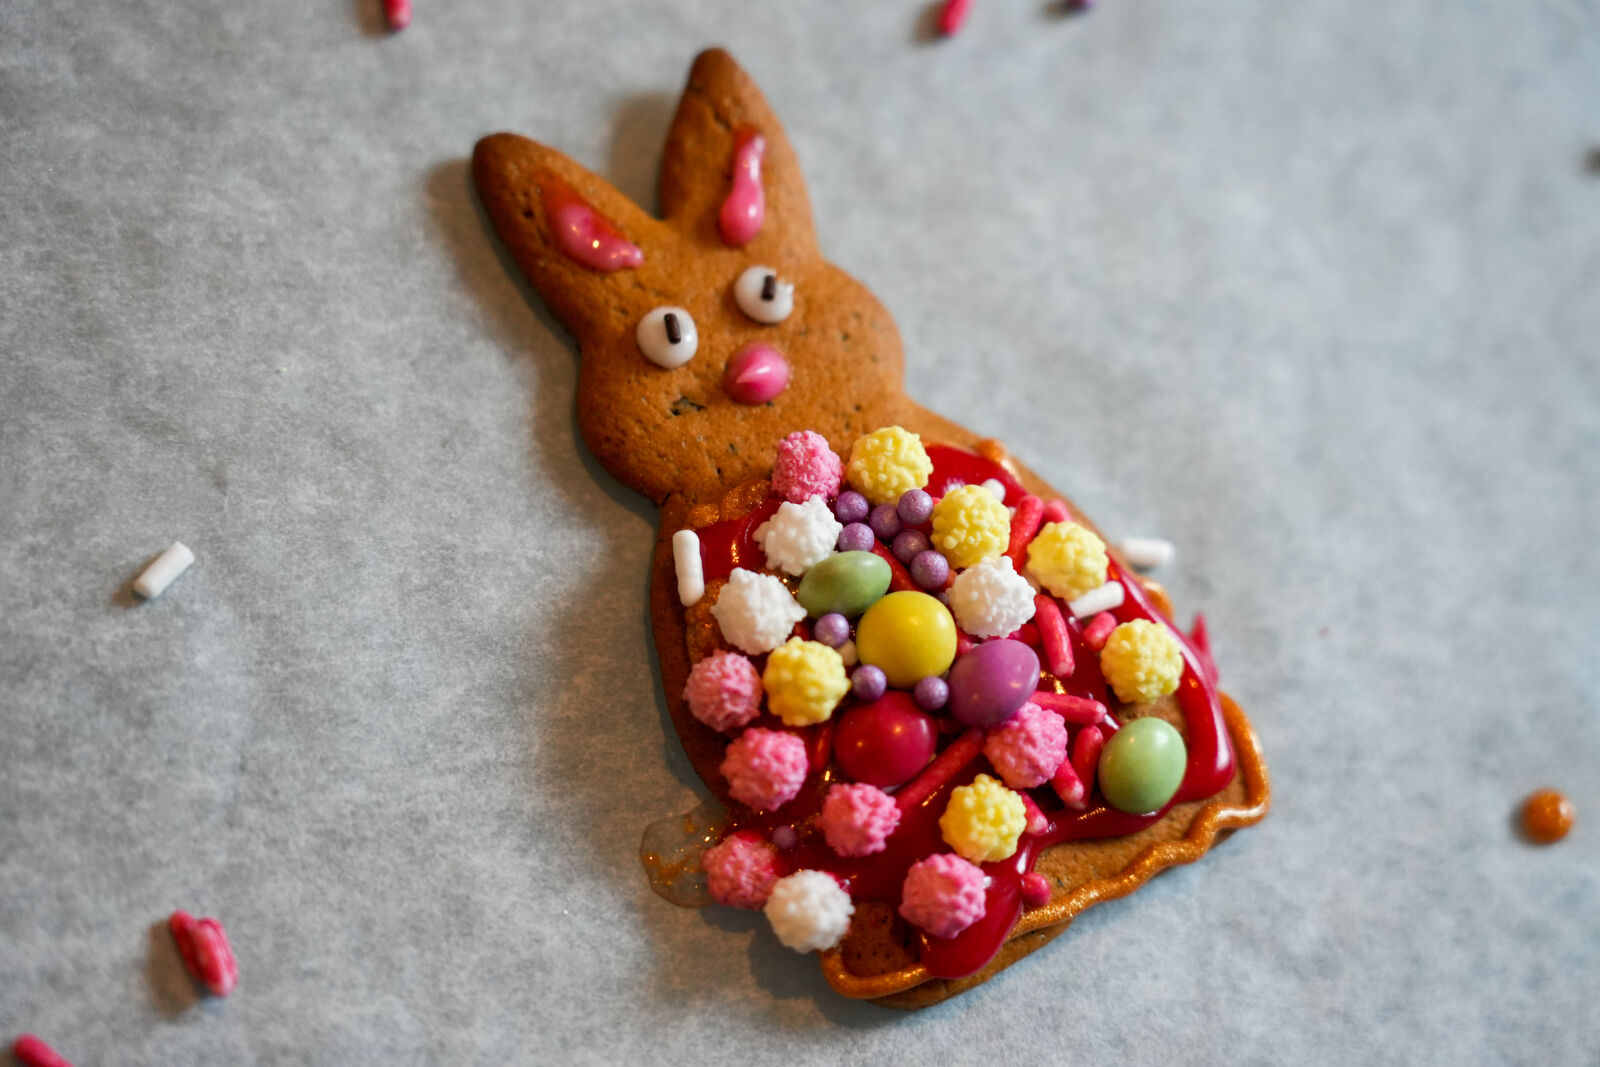 Sony a7 IV sample photo. Gingerbread bunny not feeling photography